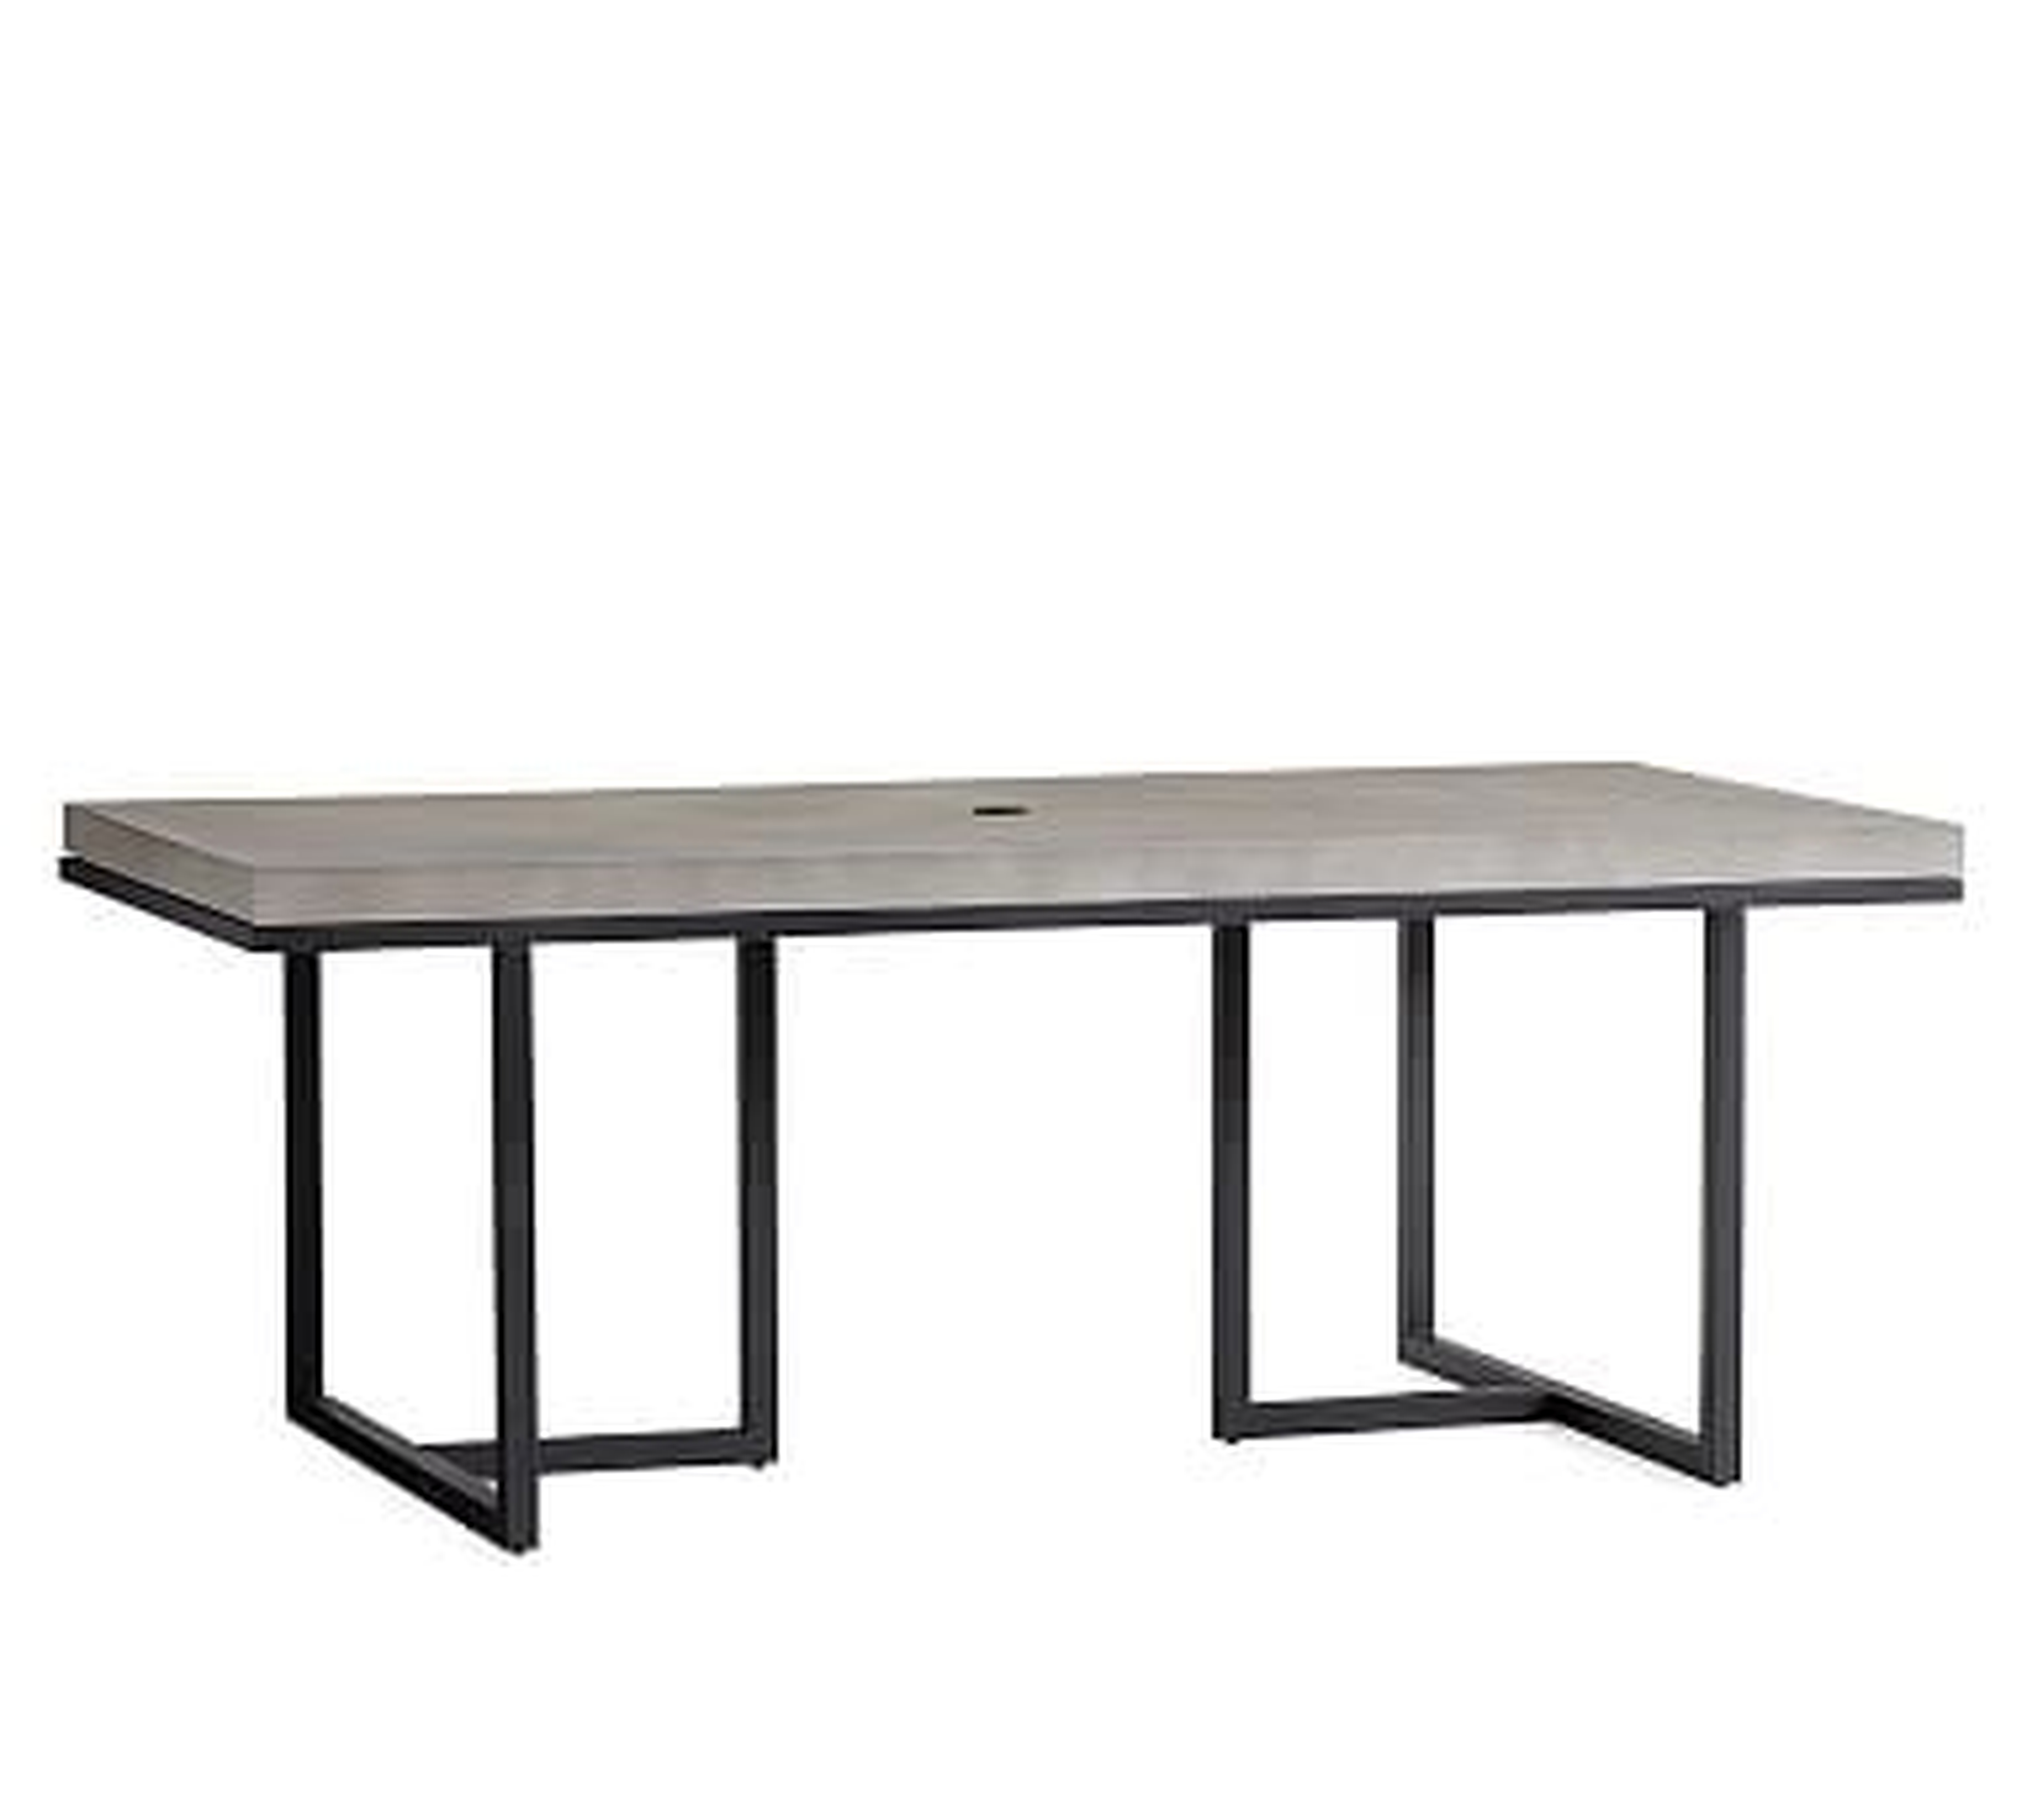 Sloan Concrete 80" Dining Table - Pottery Barn